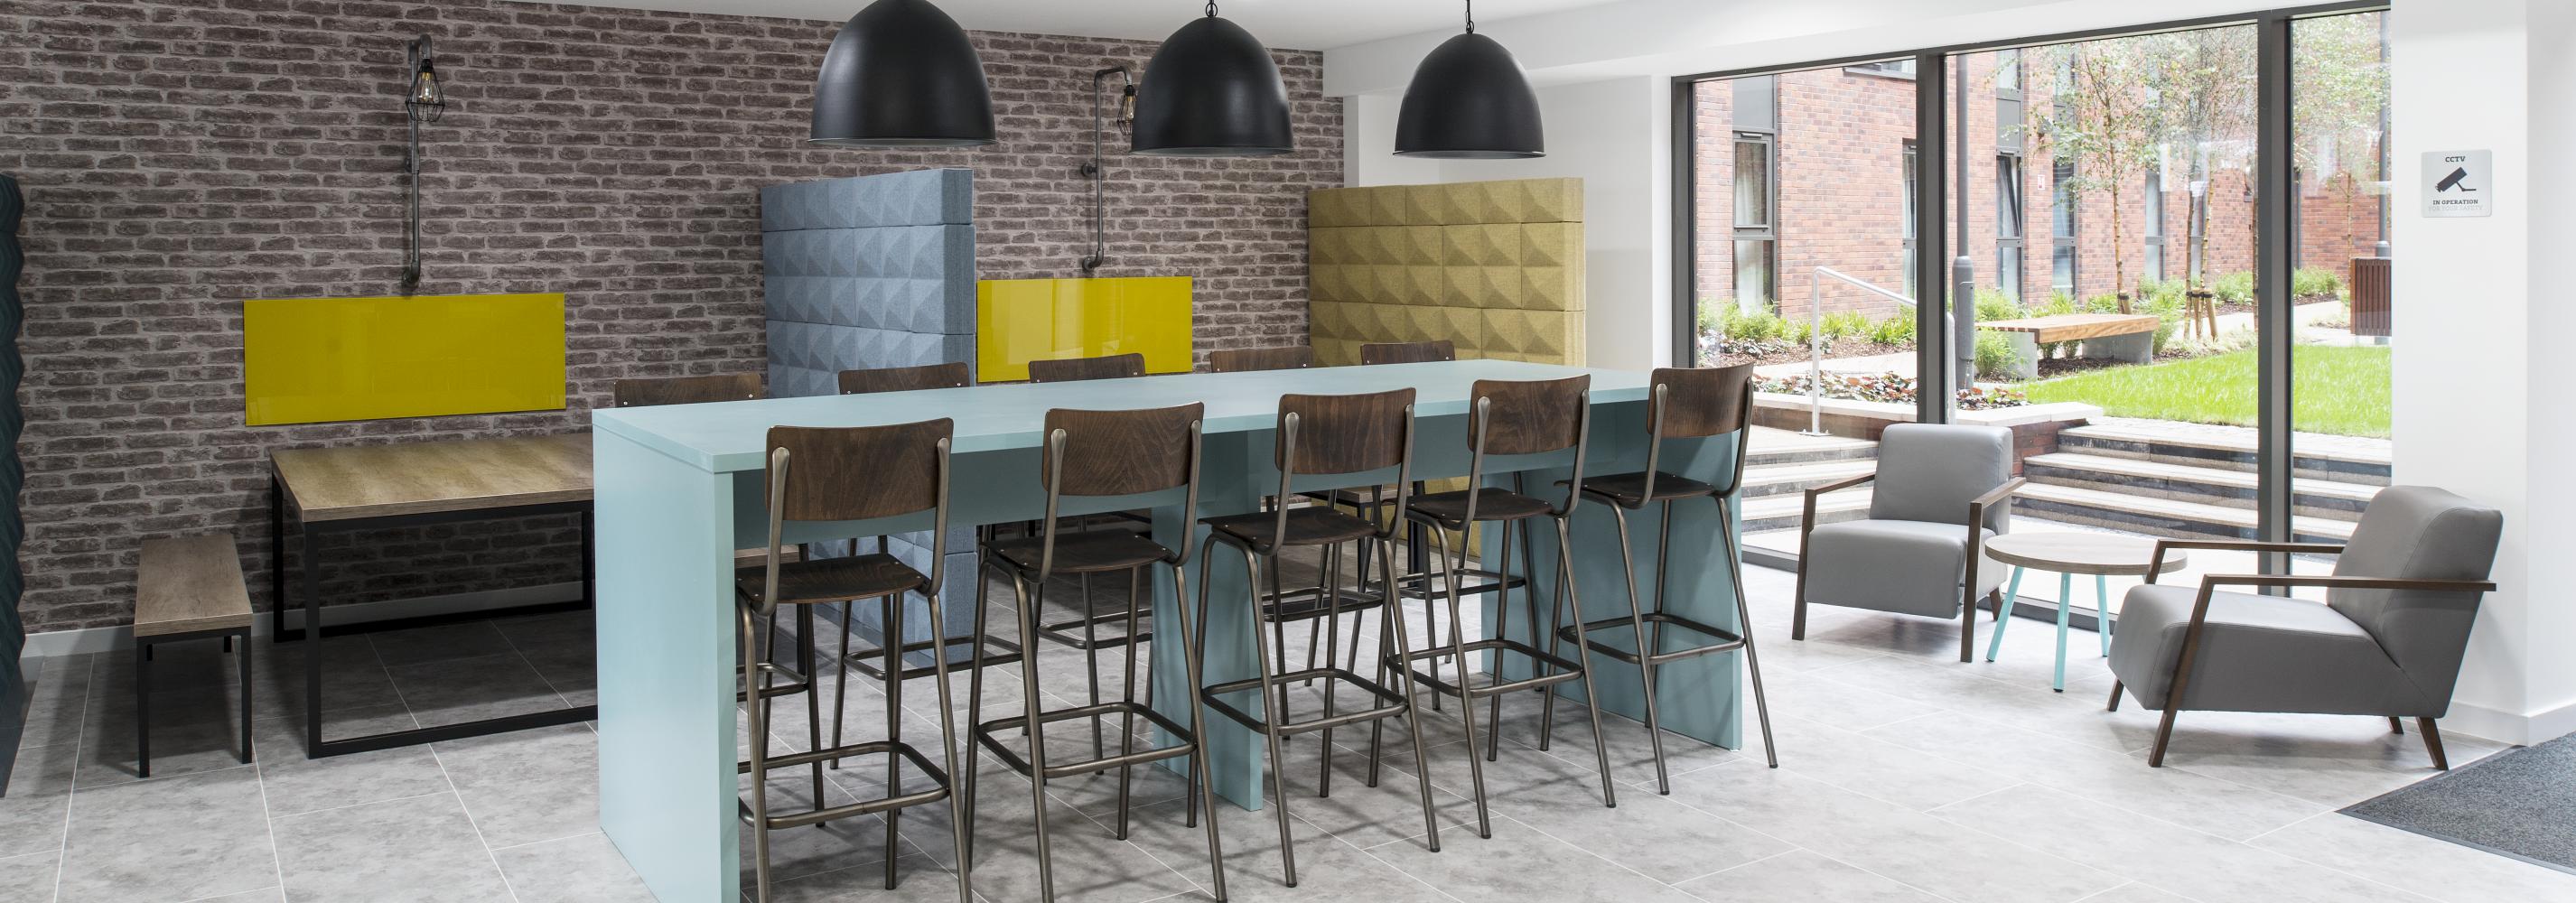 Common Room - Bar with stools and a range of tables and chairs/benches